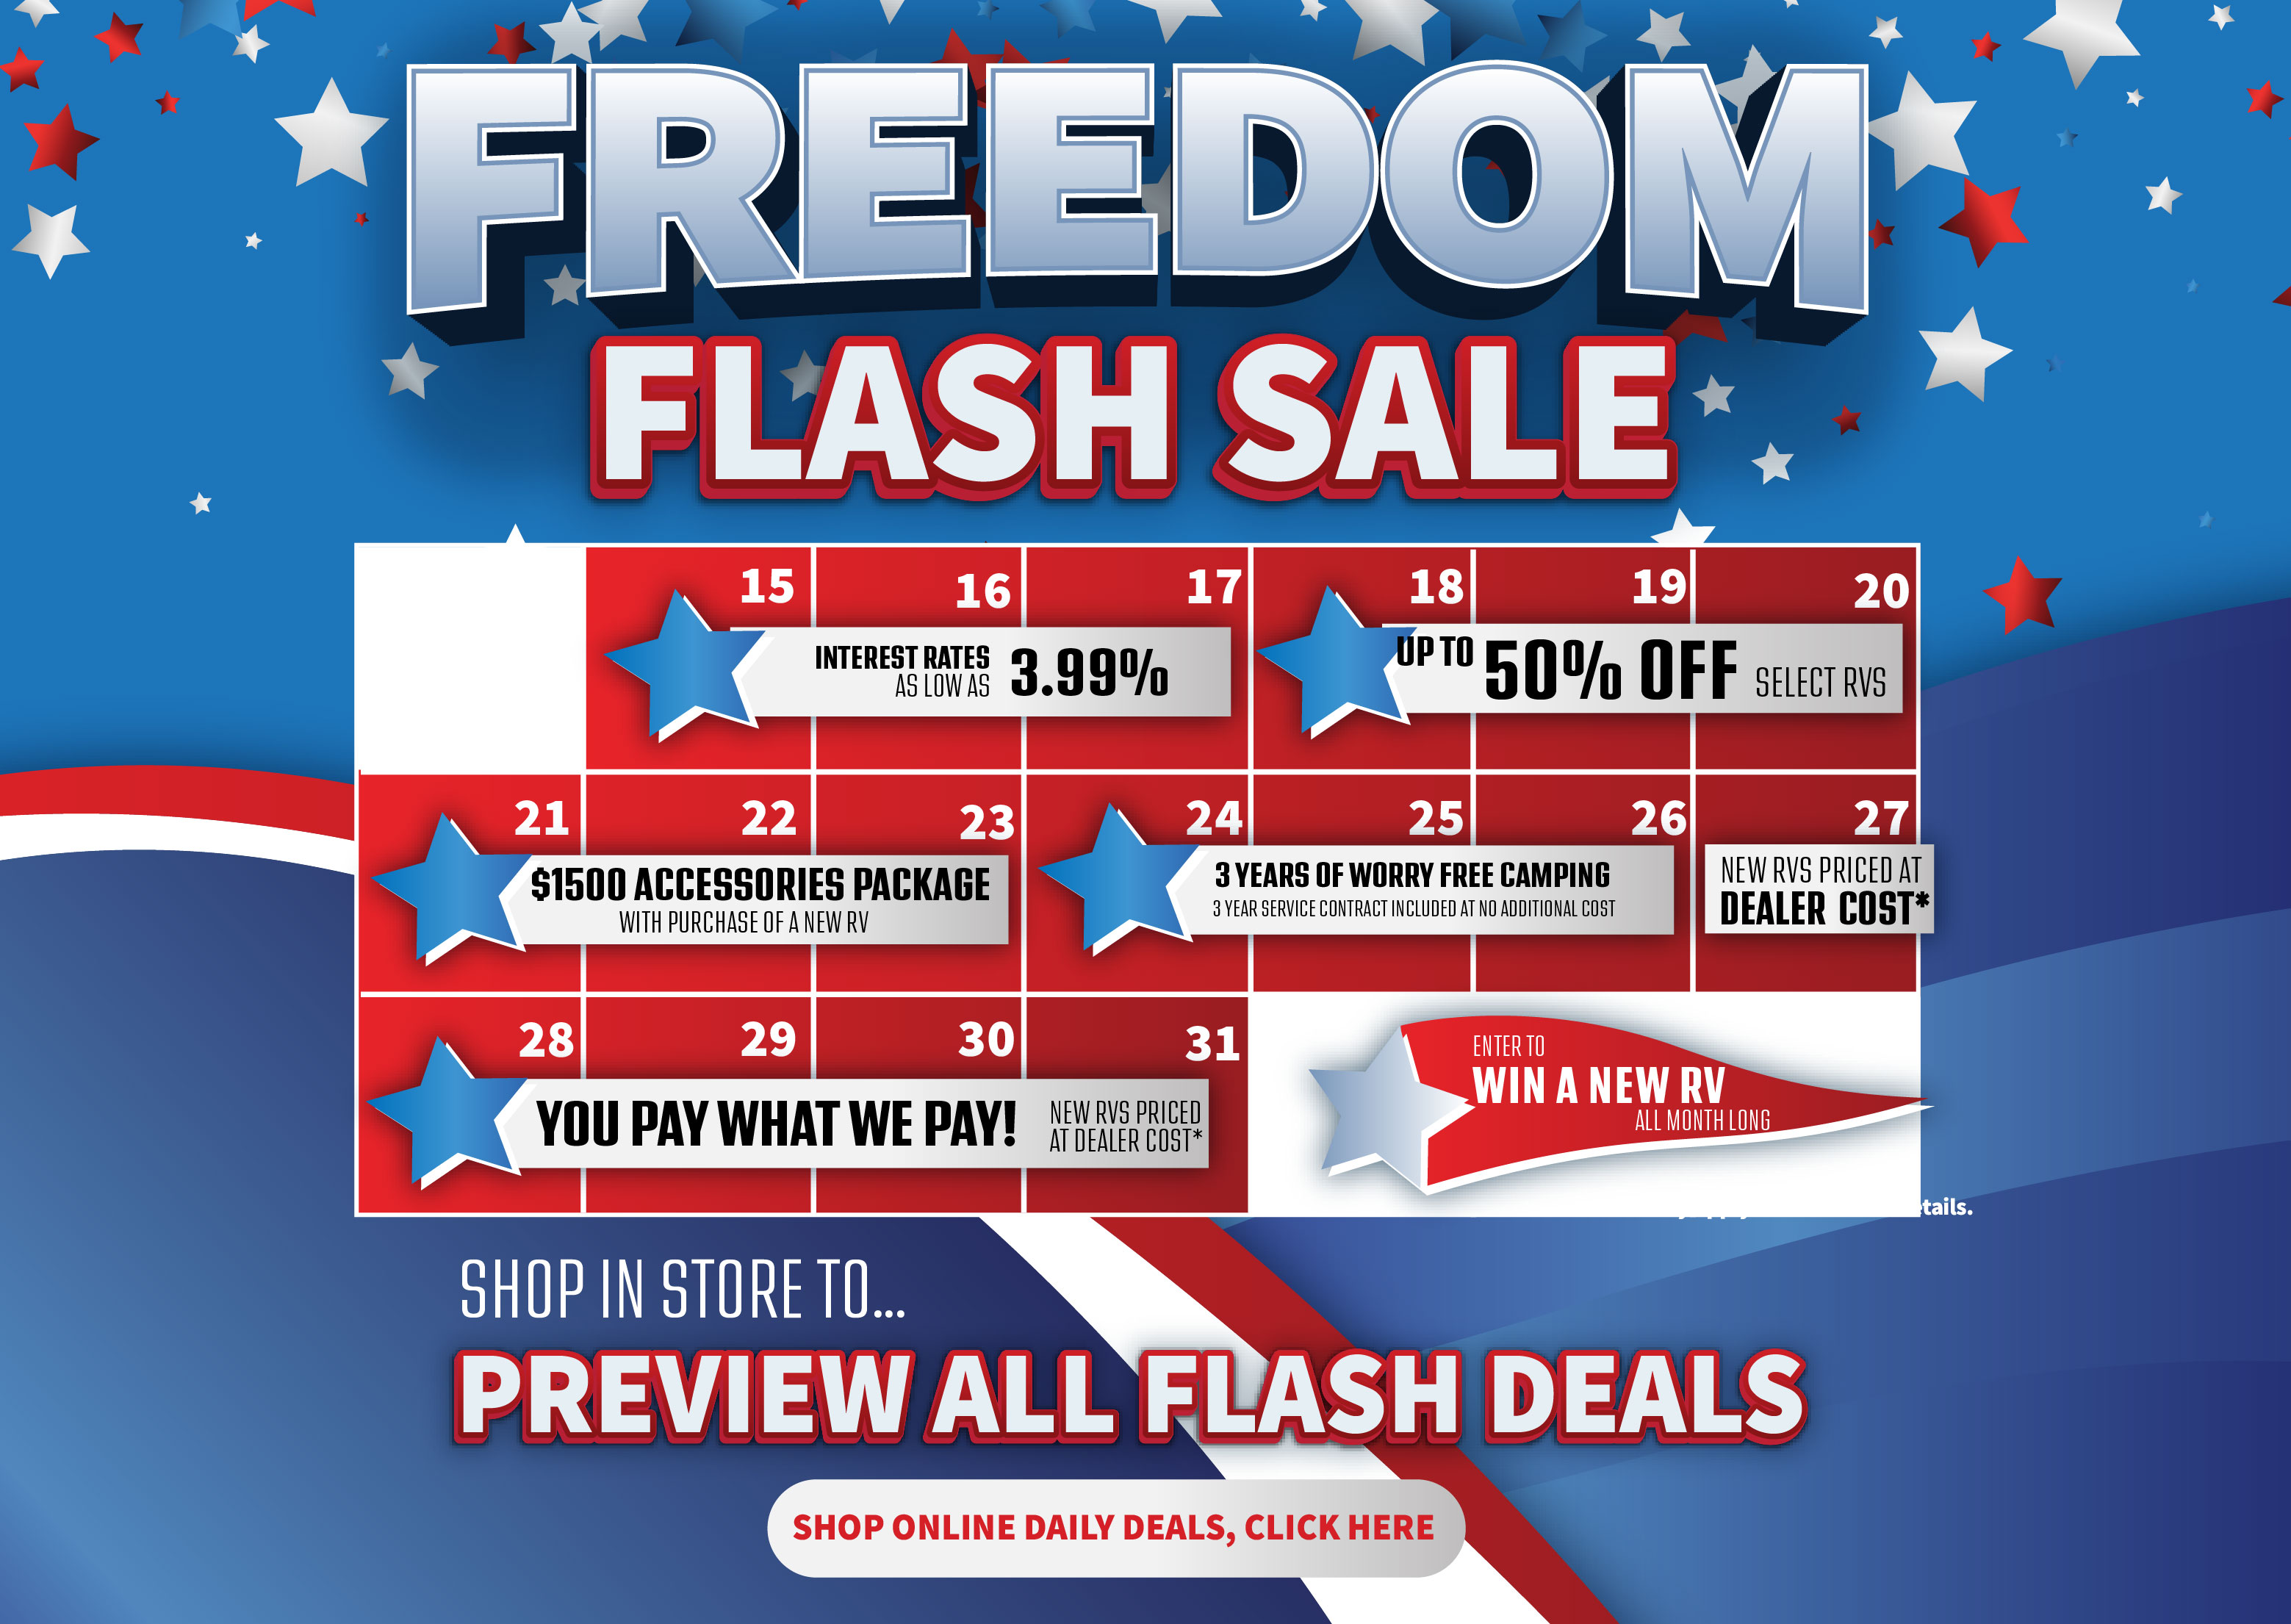 Freedom Flash Sale Dealer Cost